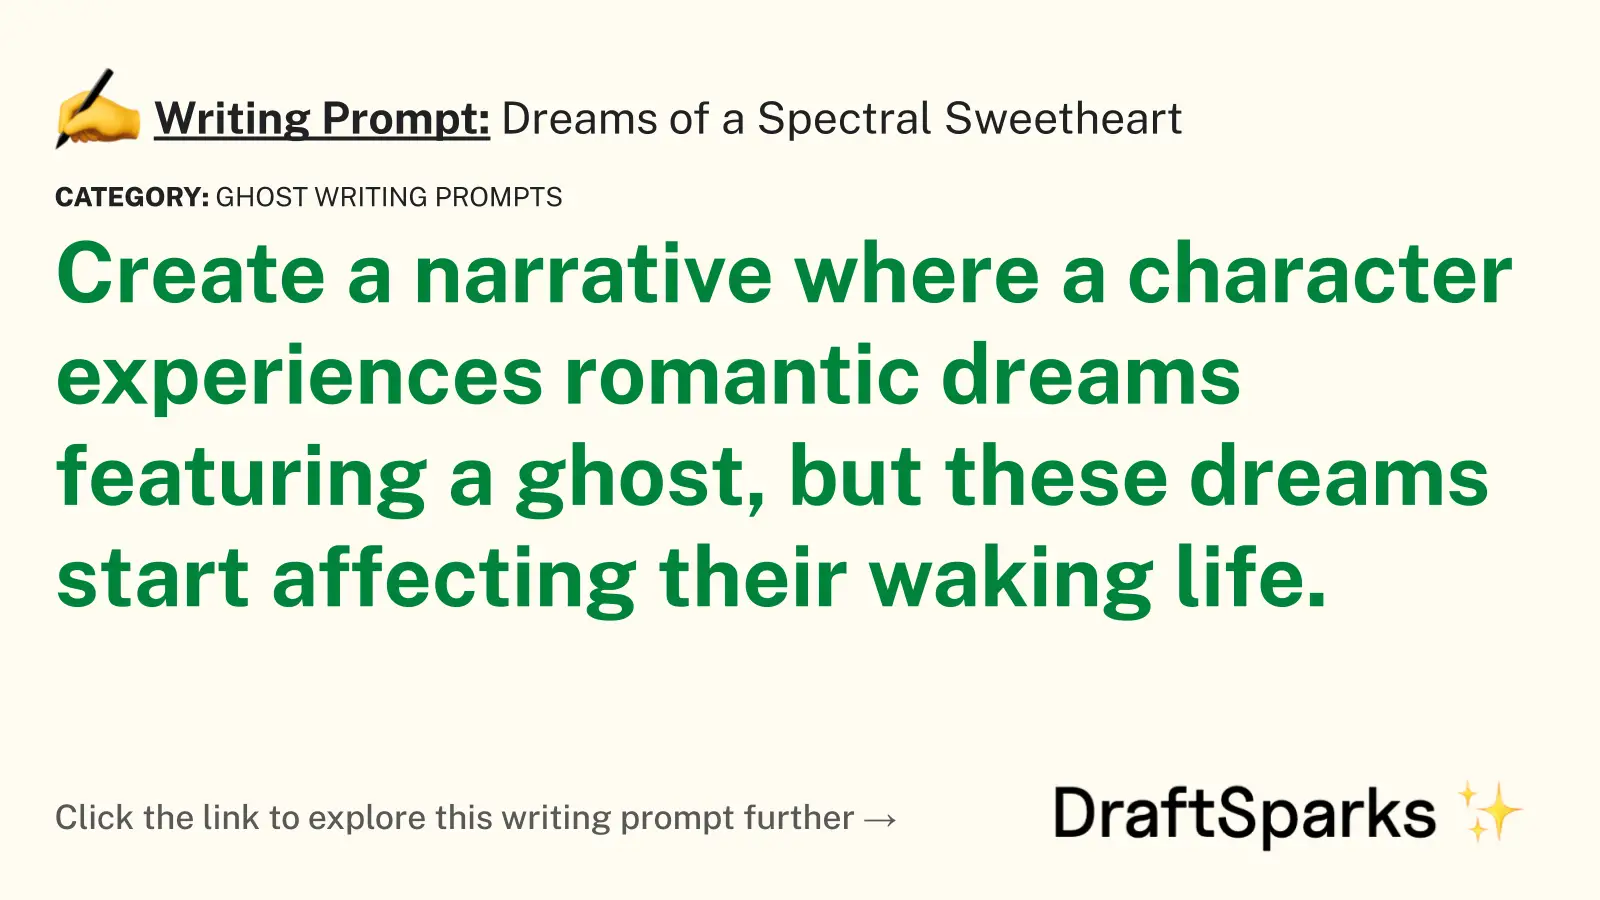 Dreams of a Spectral Sweetheart